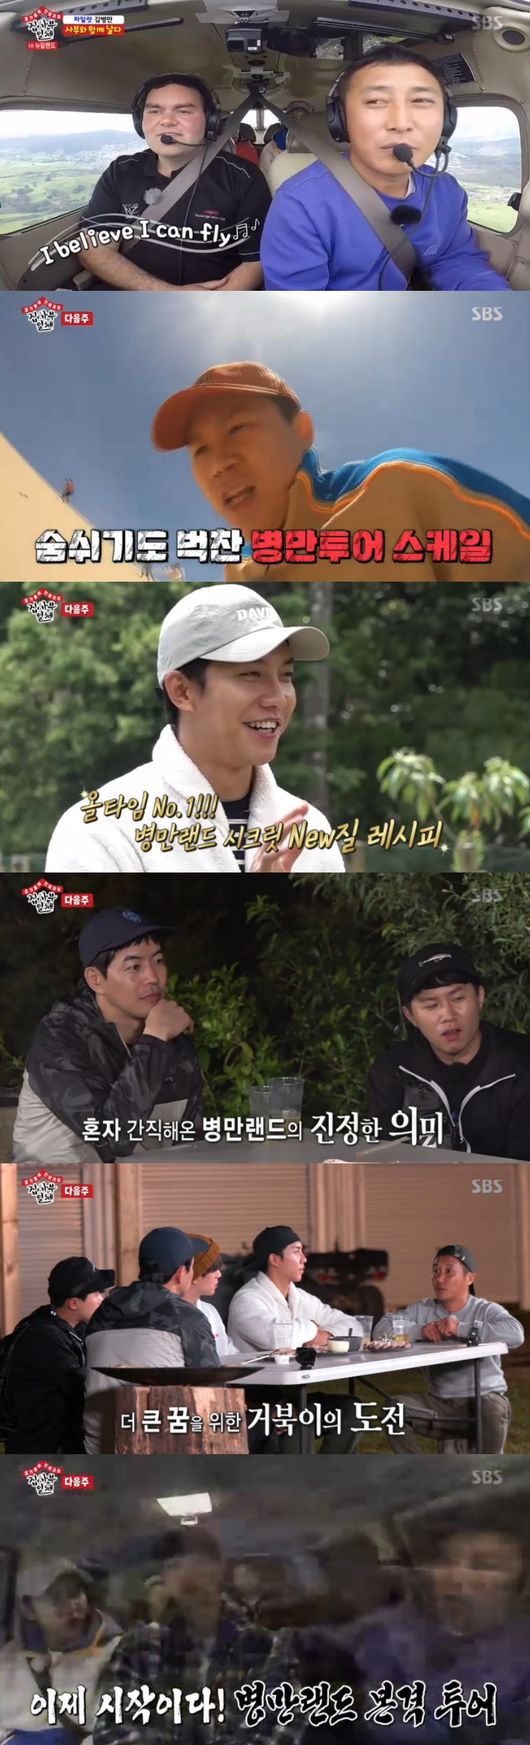 Kim Byung-man, who re-starred Master, made the dream Byeongman Land a reality.Master Kim Byung-man re-starred on SBS entertainment All The Butlers broadcast on the 8th.With members gathered in New Zealand, Yang Se-hyeong was nervous, saying, I think I will do the most in history, it will be hard.As such, the production crew said that the scale is the highest level and the difficulty level is the highest level, and that it should go beyond New Zealand.Lee Seung-gi and Yang Se-hyeong first faced Mother Nature, which had the New Zealand alpaca; it was even more welcome to be an animal inhabited in South America.They fell into an alpaca game in front of a vast nature as if they were children.At this time, the production team said, There is a hint about the current position where one of the 100 sheep has a master, and the two were panicked by the situation where they had to dig all the sheep.Lee Seung-gi began to look for the sheep, saying she saw the sheep with necklaces.At this time, a sheep dog appeared and looked for a sheep with a necklace again.I found the necklace in front of my eyes, followed the amount of strings at a rapid pace, approached me cautiously, but continued to fail.The master was watching all of them, and eventually he walked another mission to give him a lure.Yang Se-hyeong and Lee Seung-gi succeeded in imitating the sheep with a crying sound and pushing the sheep five heads, and succeeded in the mission at the end.He then succeeded in catching the necklace-clad sheep with the food to attract, and got a hint of Go to Mortiti Island.Yook Sungjae and Lee Sang-yoon also drove separately.Yook Sungjae was excited by the New Zealand bucket list, including snowboard and bungee jump.Lee Sang-yoon was terrified, saying, Be careful, horses become seeds, and that bungee jumping would like to avoid it.Then guessing a hint about the number one minute, Yook Sungjae said, Time to drop the bungee jump?Sure enough, I arrived at the place where I ride the Taupo Bunge and was overwhelmed by nature at once.The production team suggested, If two people feel the gravity of nature in a second, I will give you an address to meet the master.Lee Sang-yoon, who is different from Yook Sungjae who wants to play, is terrified.However, Lee Sang-yoon decided to overcome his fearful mind, saying, Lets do it together? If we run, we will be one.Then, looking at the emerald-colored unrealistic lake, I admired it as too pretty. I jumped out after checking the top model and safety equipment on the bungee swing with a quick wave of excitement.When they shook off their fears and succeeded in falling, the two were delighted to say, We have become one.Scared by the unpredictable New Zealand scale, the master started the Blockbuster LLC scale.I traveled directly to the sky on my own Planes and prepared to pick up the members, so the members moved to the land, sea and air Motiti Island.Lee Seung-gi said, There was a master who talked about New Zealand. If he is, he is the first master to appear for the first time in history.Lee Seung-gi said, Maybe Ill sleep outside of us. Yang Se-hyeong said, Its good, itll be fun.At this point, I found a bunch of dolphins, and I was excited about all the lucky dolphins, and I was amazed at the incredible sight, and I was speechless because of the appearance I would see in movies.They were delighted, saying, I felt like I was full of good things, I was lucky. It was a wonder of nature in the cool sea.He arrived on land, and drove away. The driver said, I met him at the Flying School. He gave a hint about the master, and then said, I will meet the master soon.He said he would drop him off to the master, but he was left in a green field. The two were embarrassed, saying, What is this place?Lee Seung-gi and Yang Se-hyeong waited for the master in the middle of the hill, and a Planes flew over New Zealand in the middle of the farm.They were amazed, saying, I dont think so, and if its right, its a history-class appearance. It was a rare sight seen on the mysterious island of Motiti.Planes landed, and two people recognized Master Kim Byung-man at once; two tensions also ran in the appearance of Blockbuster LLC.Yang Se-hyeong welcomed Kim Byung-man hotly, saying, Kim Byung-man is crazy, a real Crazy.Yang Se-hyeong kneeled down and admired Kim Byung-man, who returned to Korea with the dream of Planes pilot in a year, saying, It is the first time in Korea that I myself control and appear.Kim Byung-man, who passed the handwriting at the end of the fourth round, said he was studying at New Zealand with the goal of climbing into the New Zealand sky, currently selling out to English language.It was already rumored that Cressy Guy was around, and he showed the spirit of Crazy Top Model, which was rumored to New Zealand.The members said, The top model spirit that has achieved a dream to envy in a year. Kim Byung-man said, For that reason, Korea is only able to fly for business, and training plans are limited. But here are so diverse and can land on the beach.Kim Byung-man said: The big purpose is to flexibly cope with various situations during flight.You can train freely in New Zealand, and you are in the process of studying abroad to become a perfect pilot. Yang Se-hyeong said, I think Im crazy to leave the same Comedian, great. Kim Byung-man said, I want to be a flying world and a celebrity to guide the flying world.In earnest, the master Kim Byung-man moved all together in a directly controlled Planes.Unlike a year ago, Kim Byung-man, who was much more skilled and relaxed, showed the excitement that they were not believed.Kim Byung-man moved to the runway after checking everything, leaving his Top Model, who made numerous dreams a reality, to admire everyone.All The Butlers broadcast screen capture